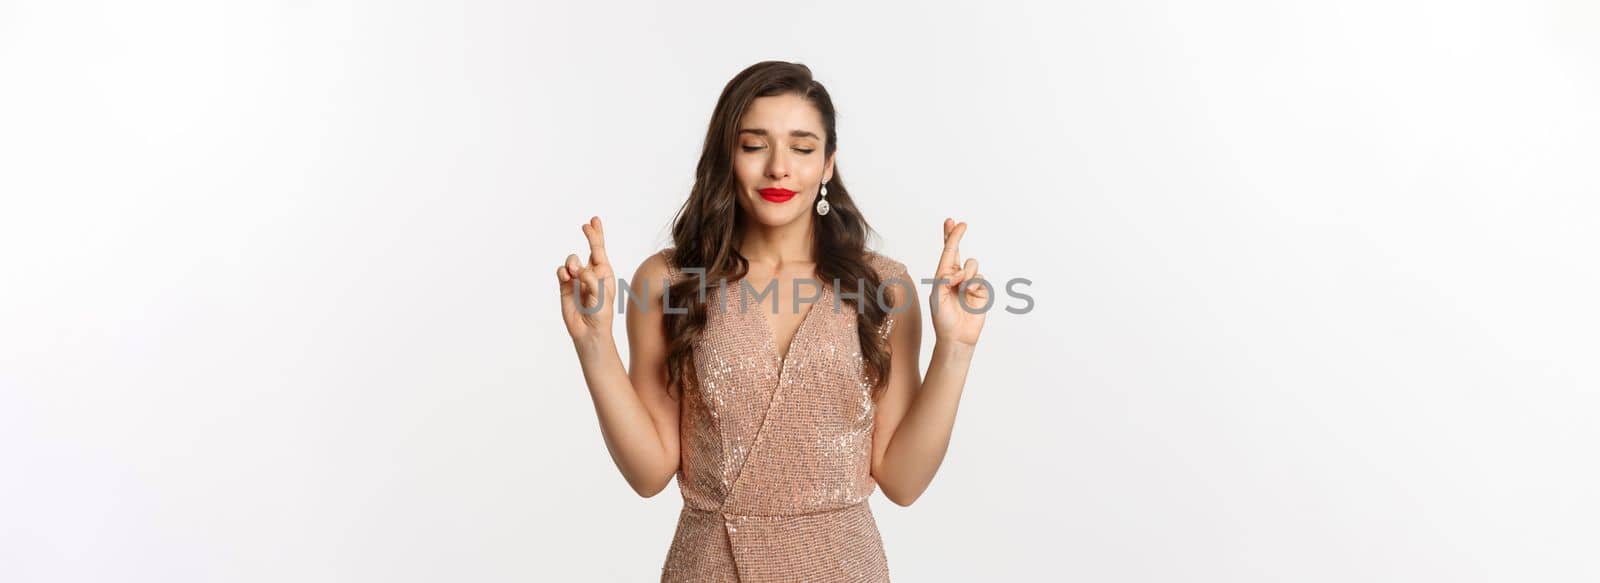 Concept of casino, celebration and party. Hopeful beautiful woman making a wish, cross fingers for good luck, dreaming of winning, white background.